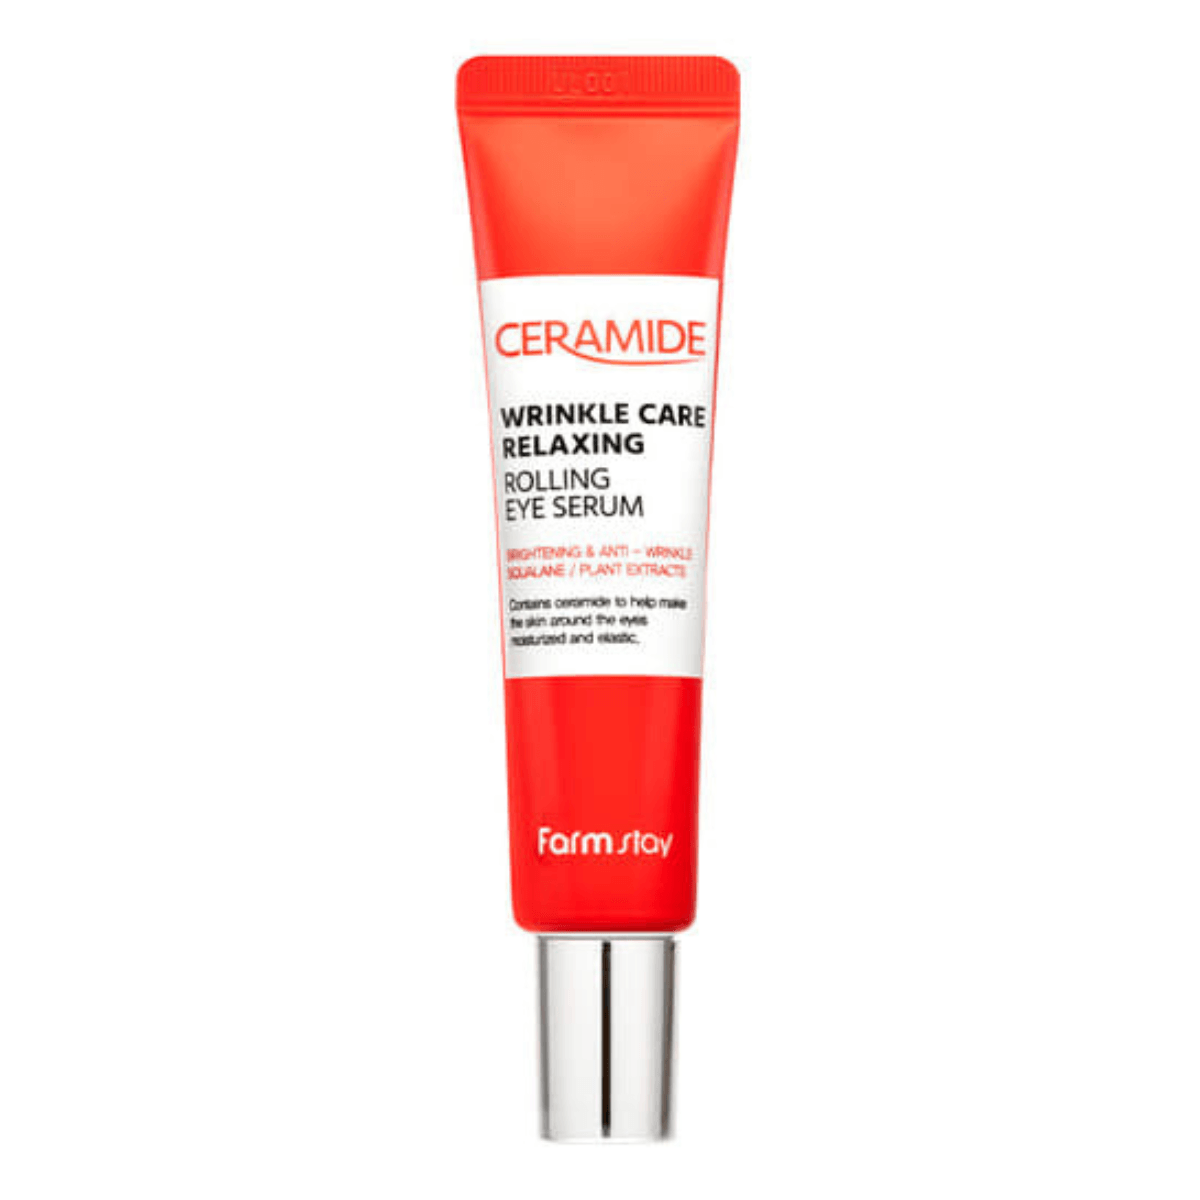 Farmstay Ceramide Wrinkle Care Eye Serum: Moisturizes, cools, brightens and improves wrinkles with a roll-on applicator.